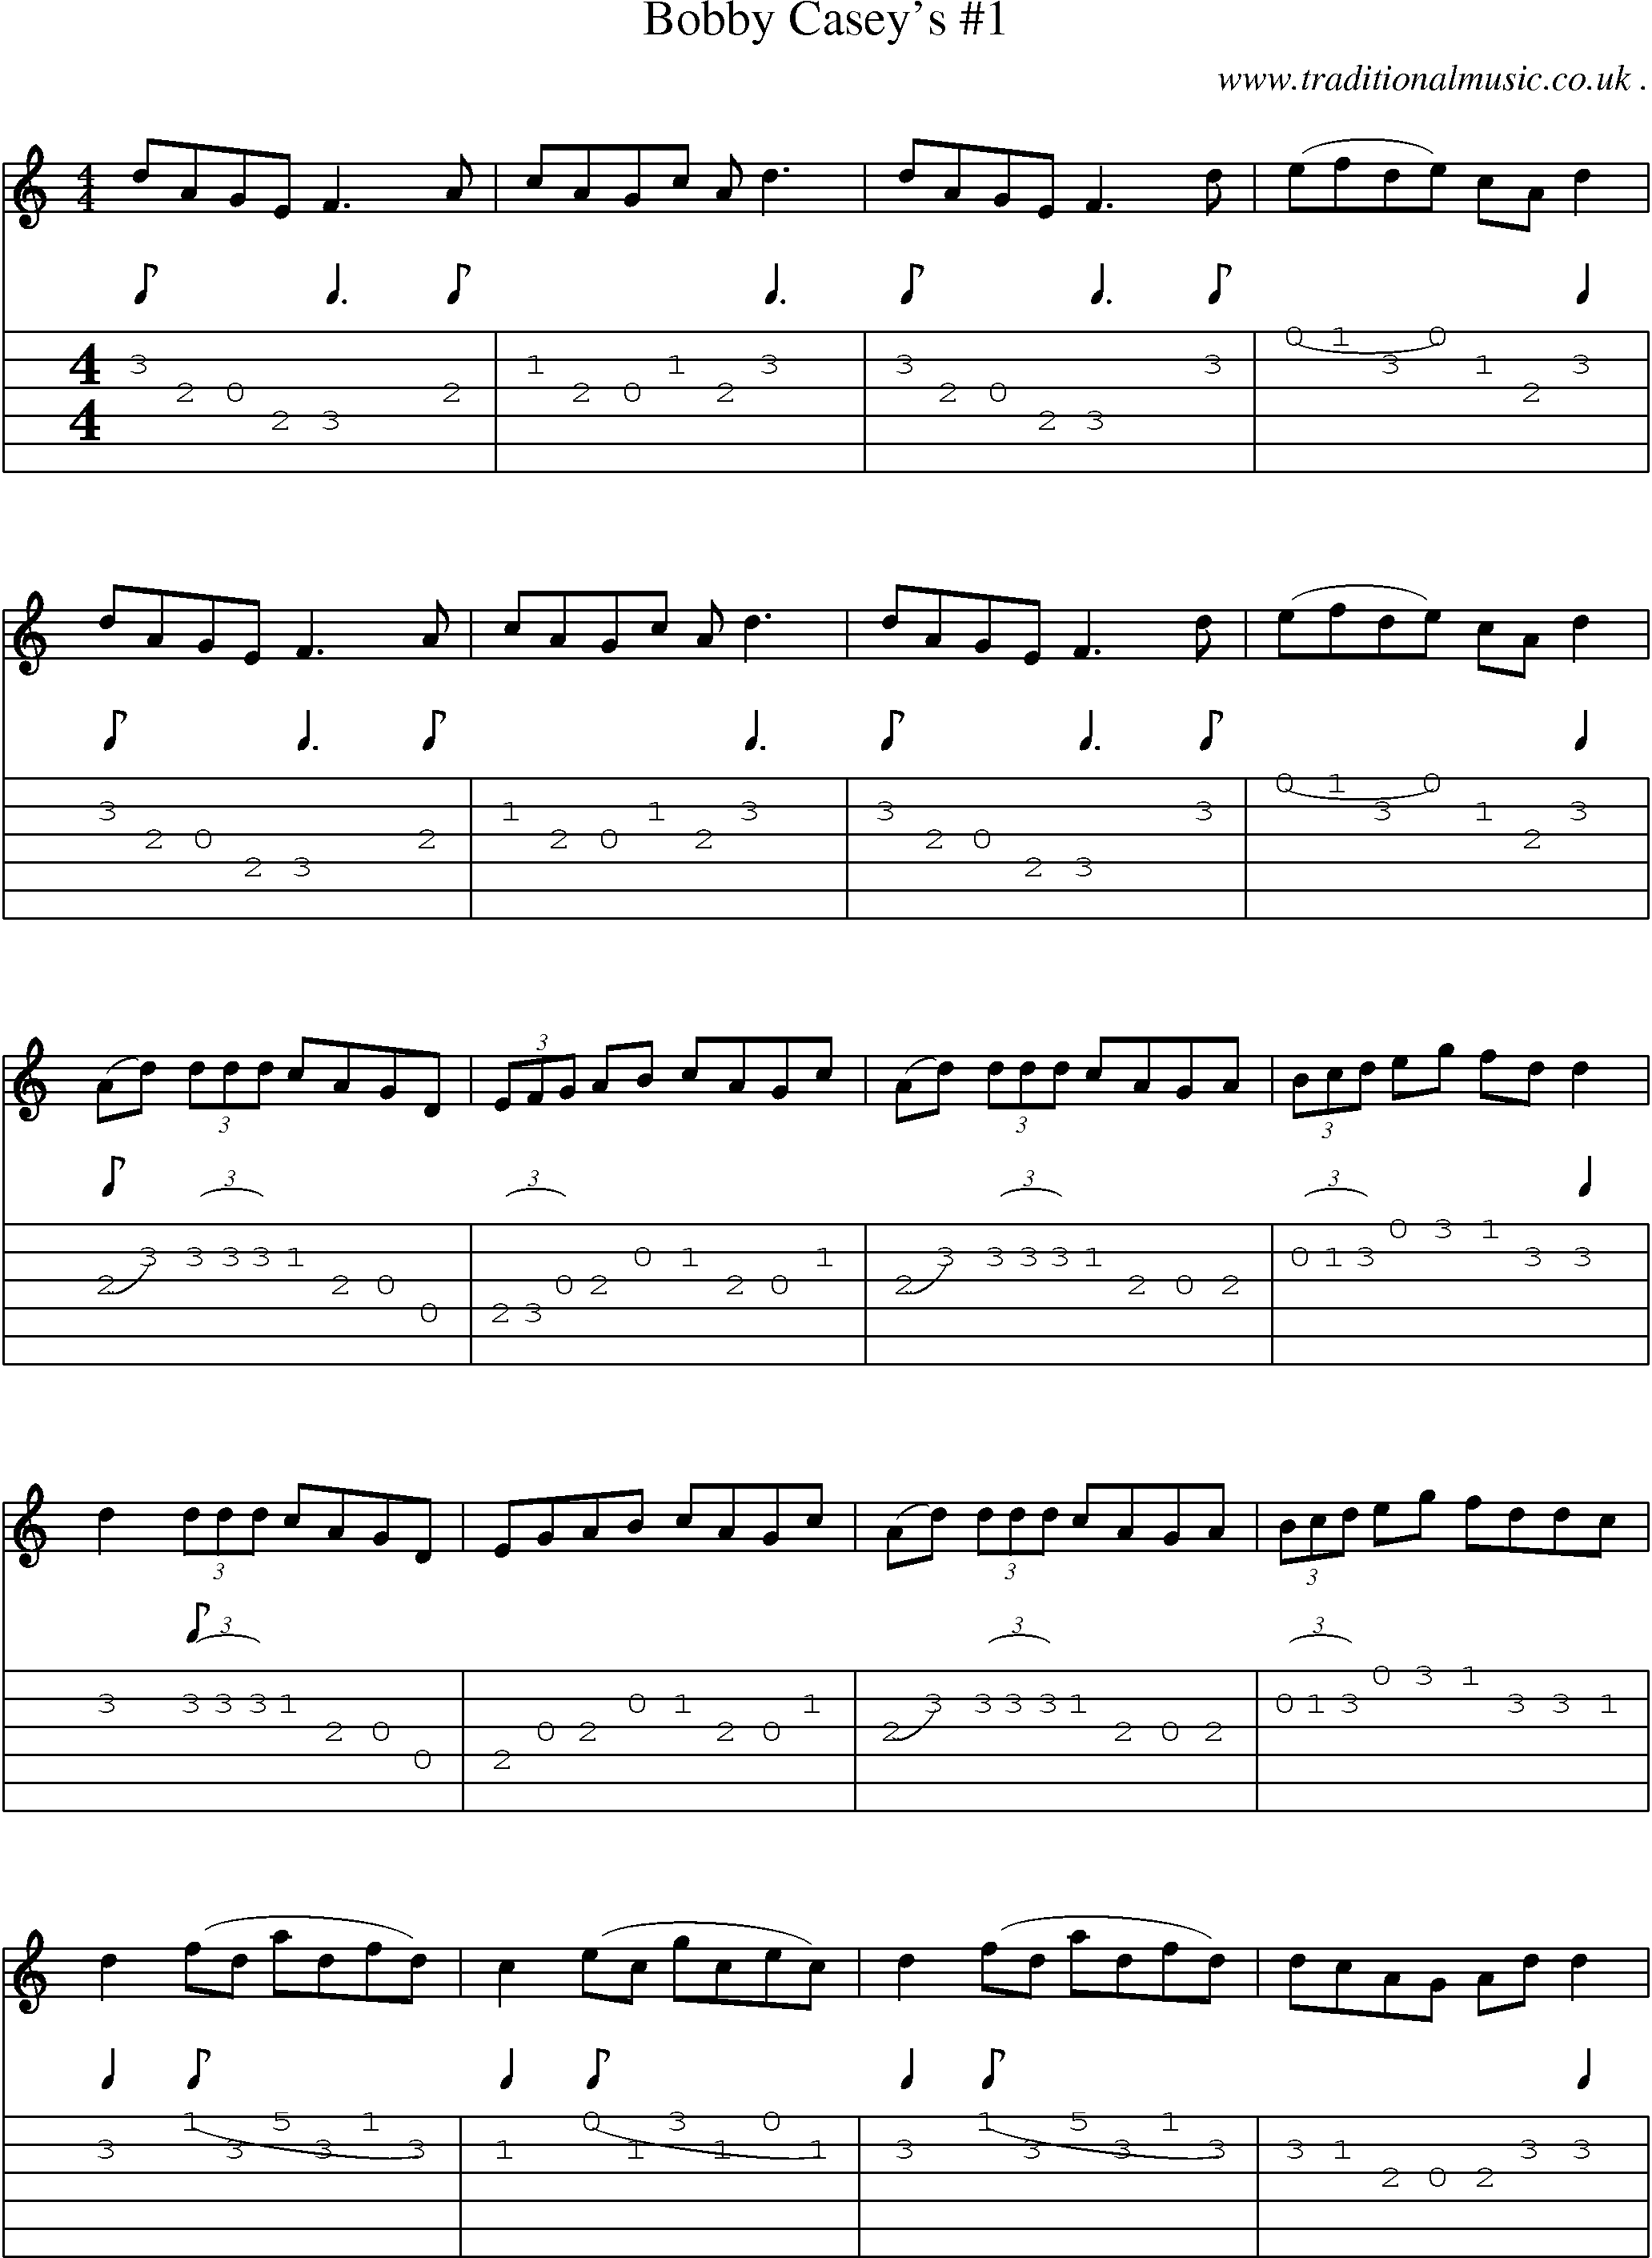 Sheet-Music and Guitar Tabs for Bobby Caseys 1